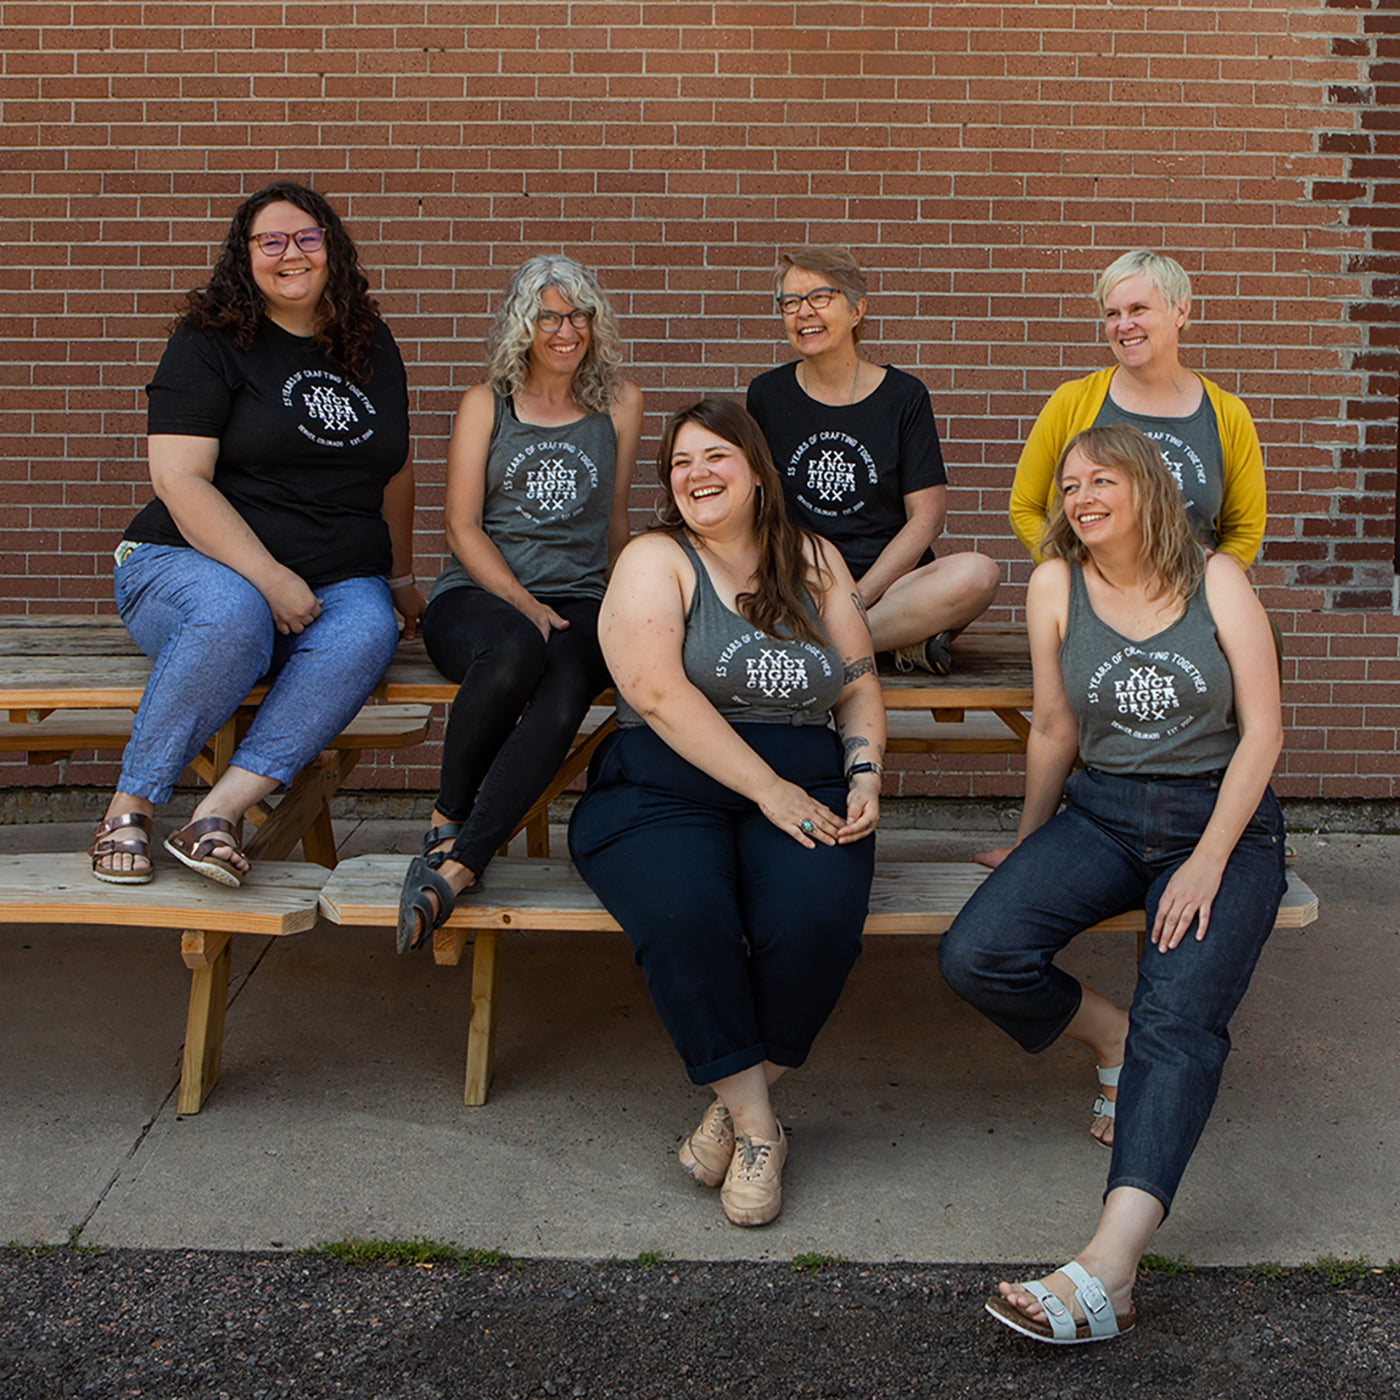 This is an image of women wearing Fancy Tiger Crafts shirts sitting on benches in front of a brick wall. 